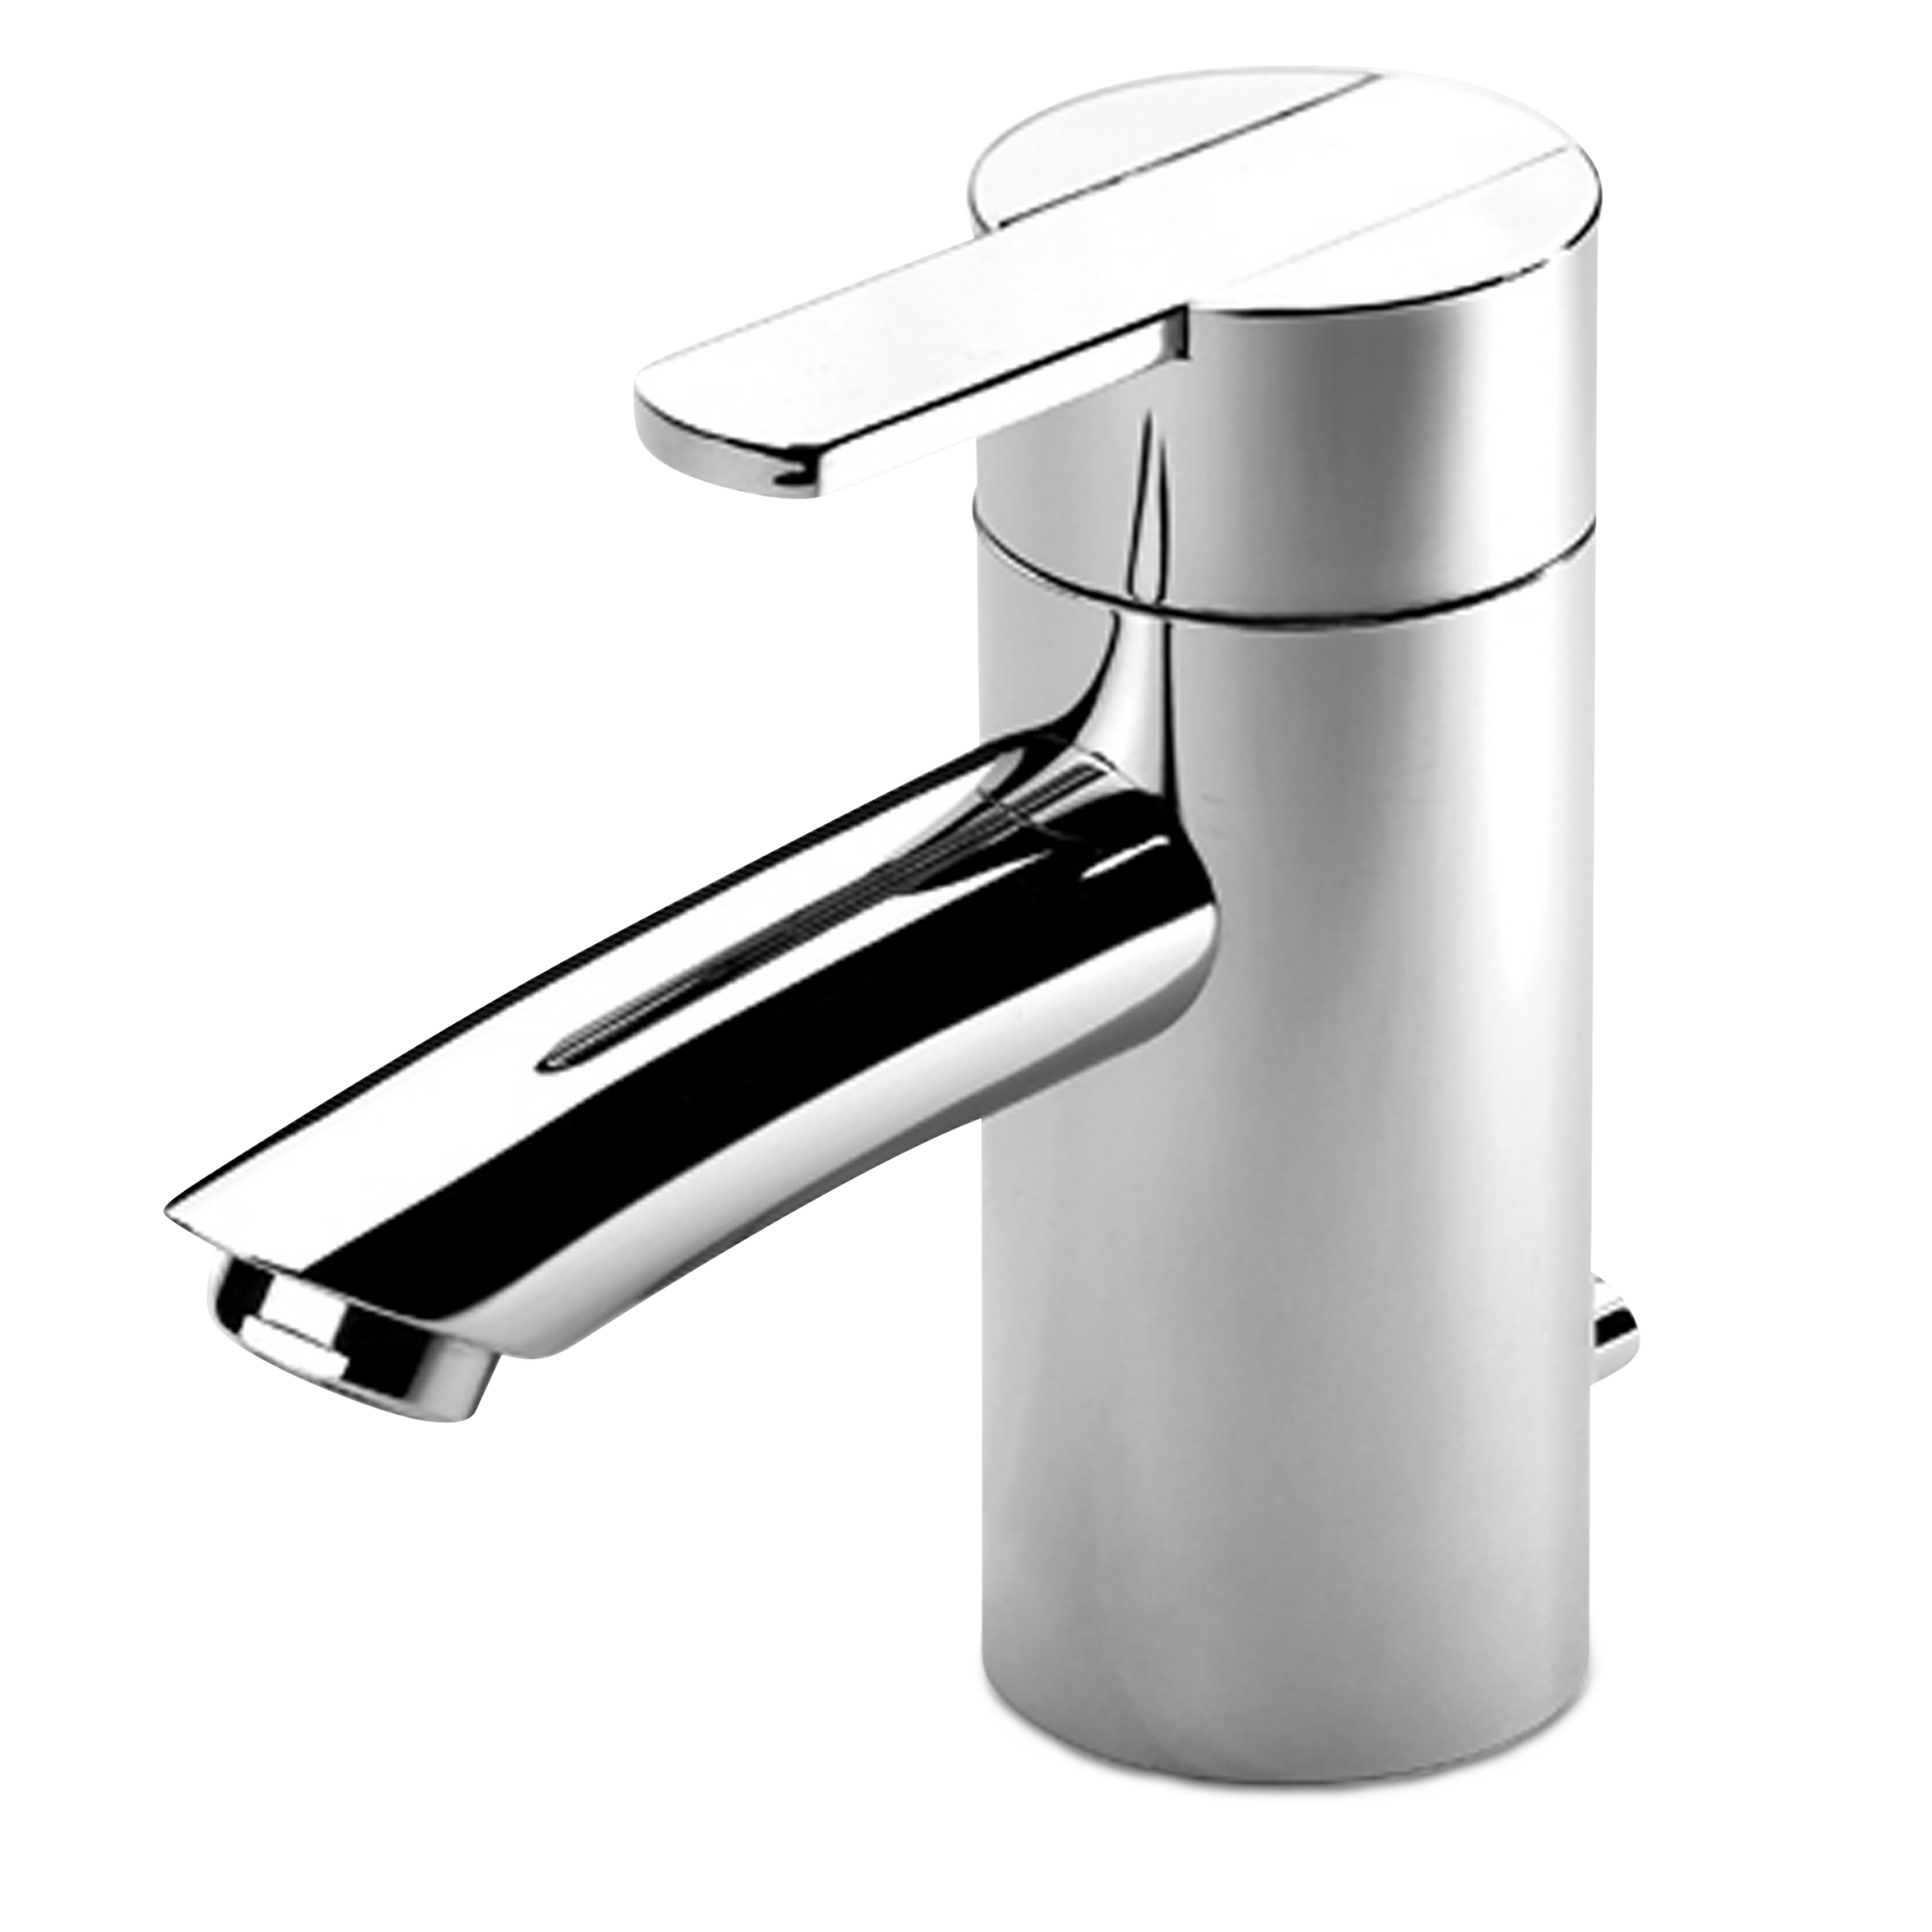 The Samuel Heath Xenon Faucet is a single-hole faucet with one gently curved lever handle.